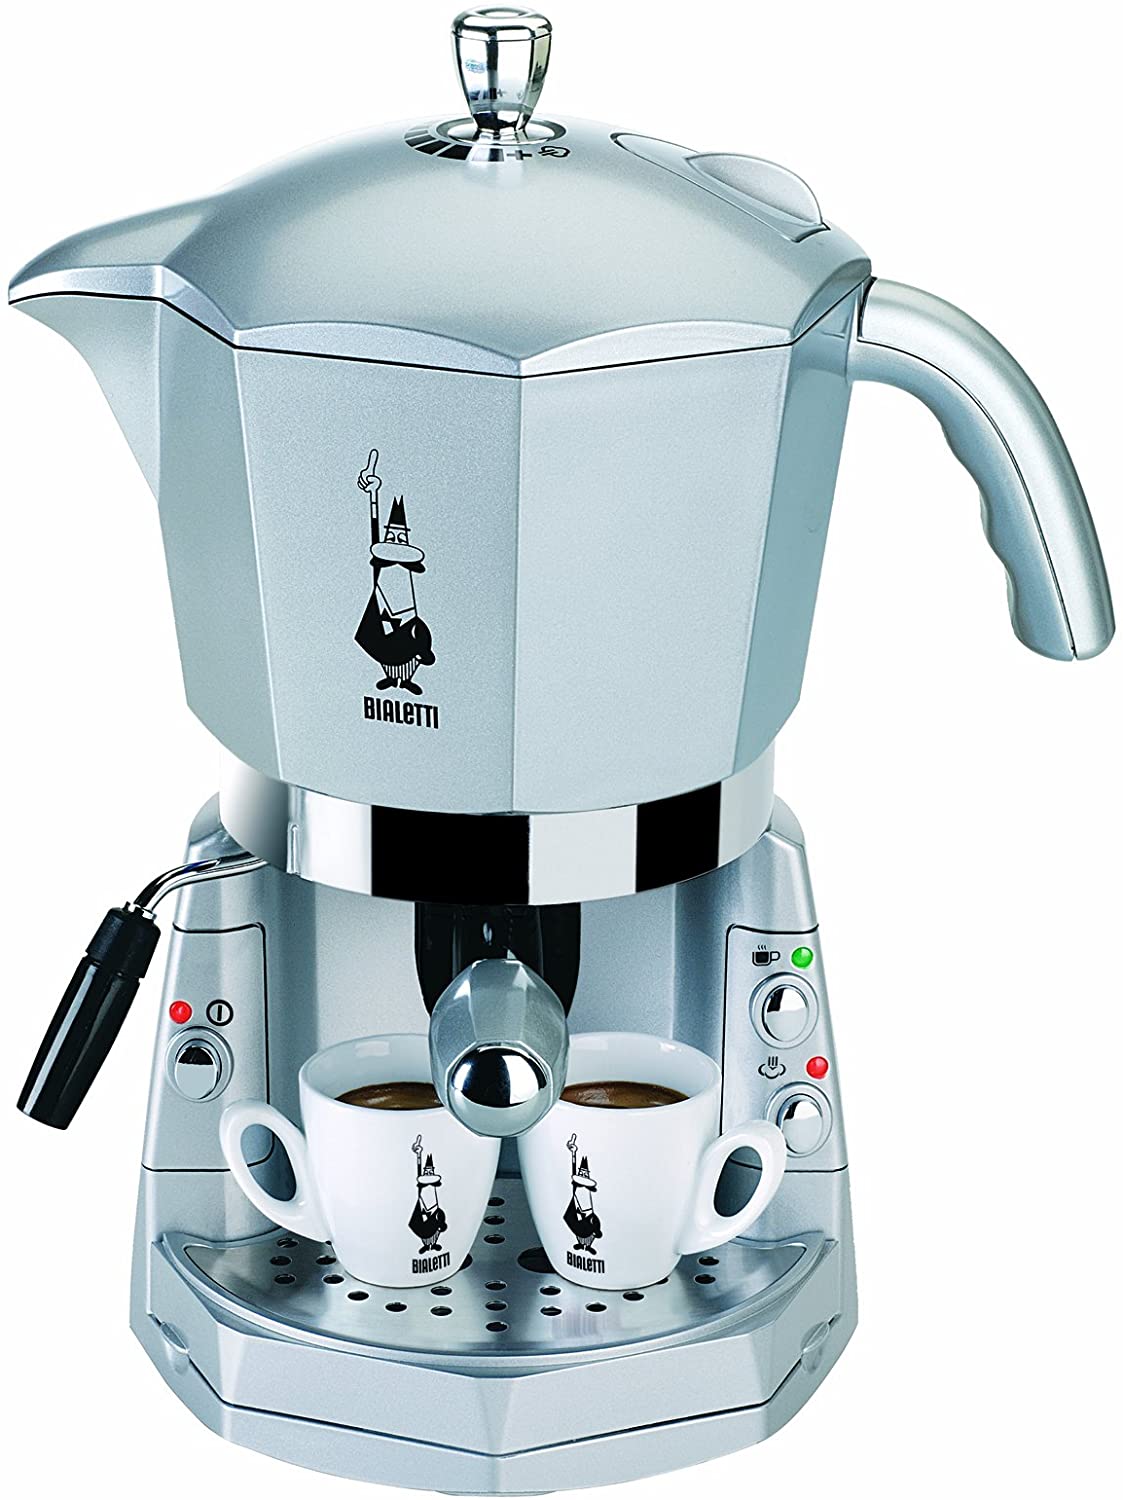 Bialetti Mokona Coffee maker with trivalent system, color: silver